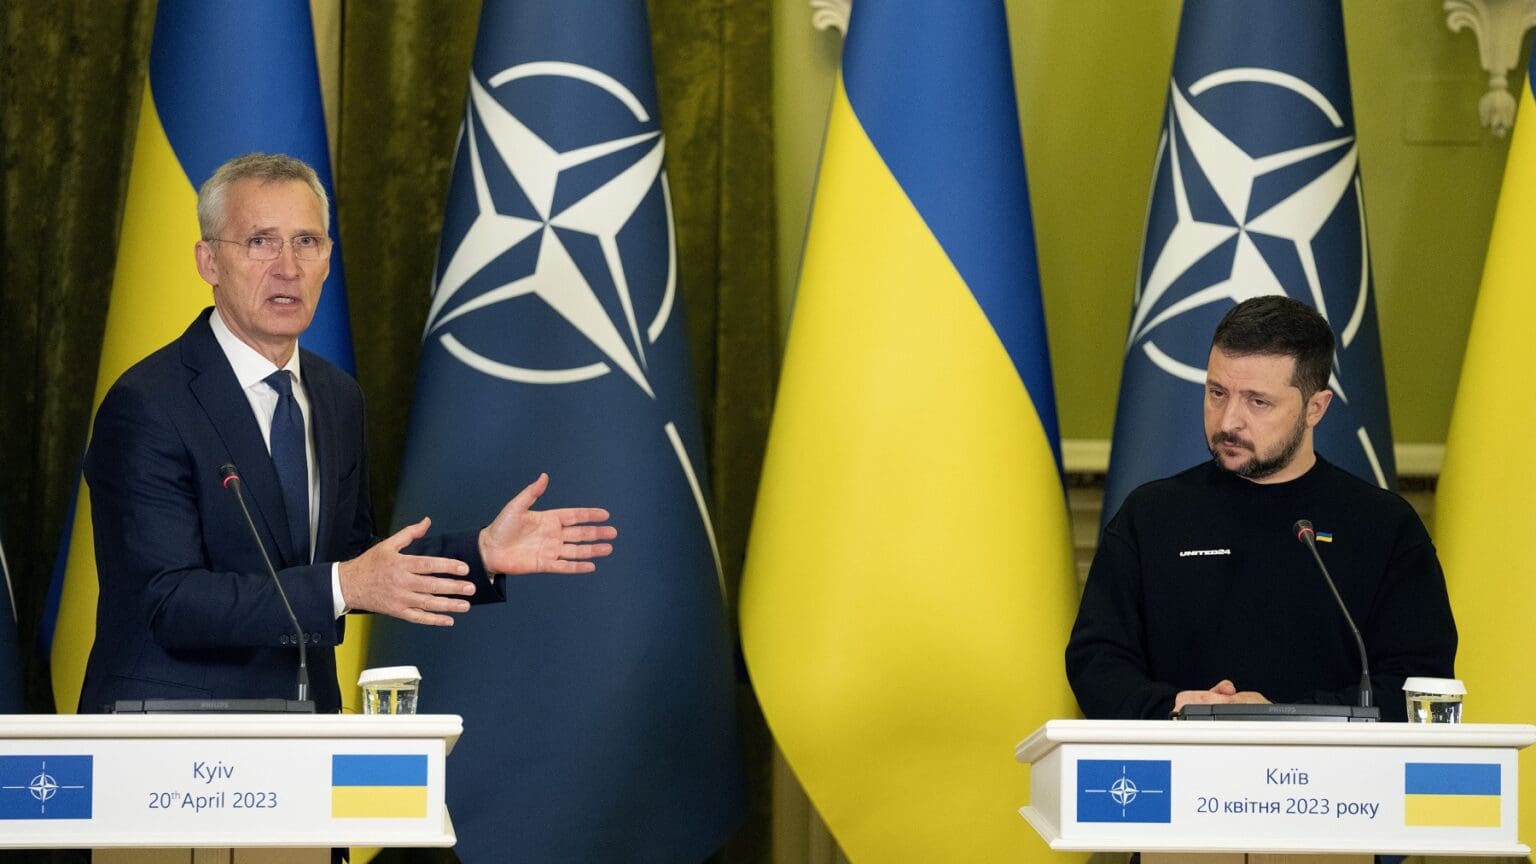 Secretary General Claims ‘Ukraine’s Rightful Place Is in NATO’, Viktor Orbán Reacts With a Single Word